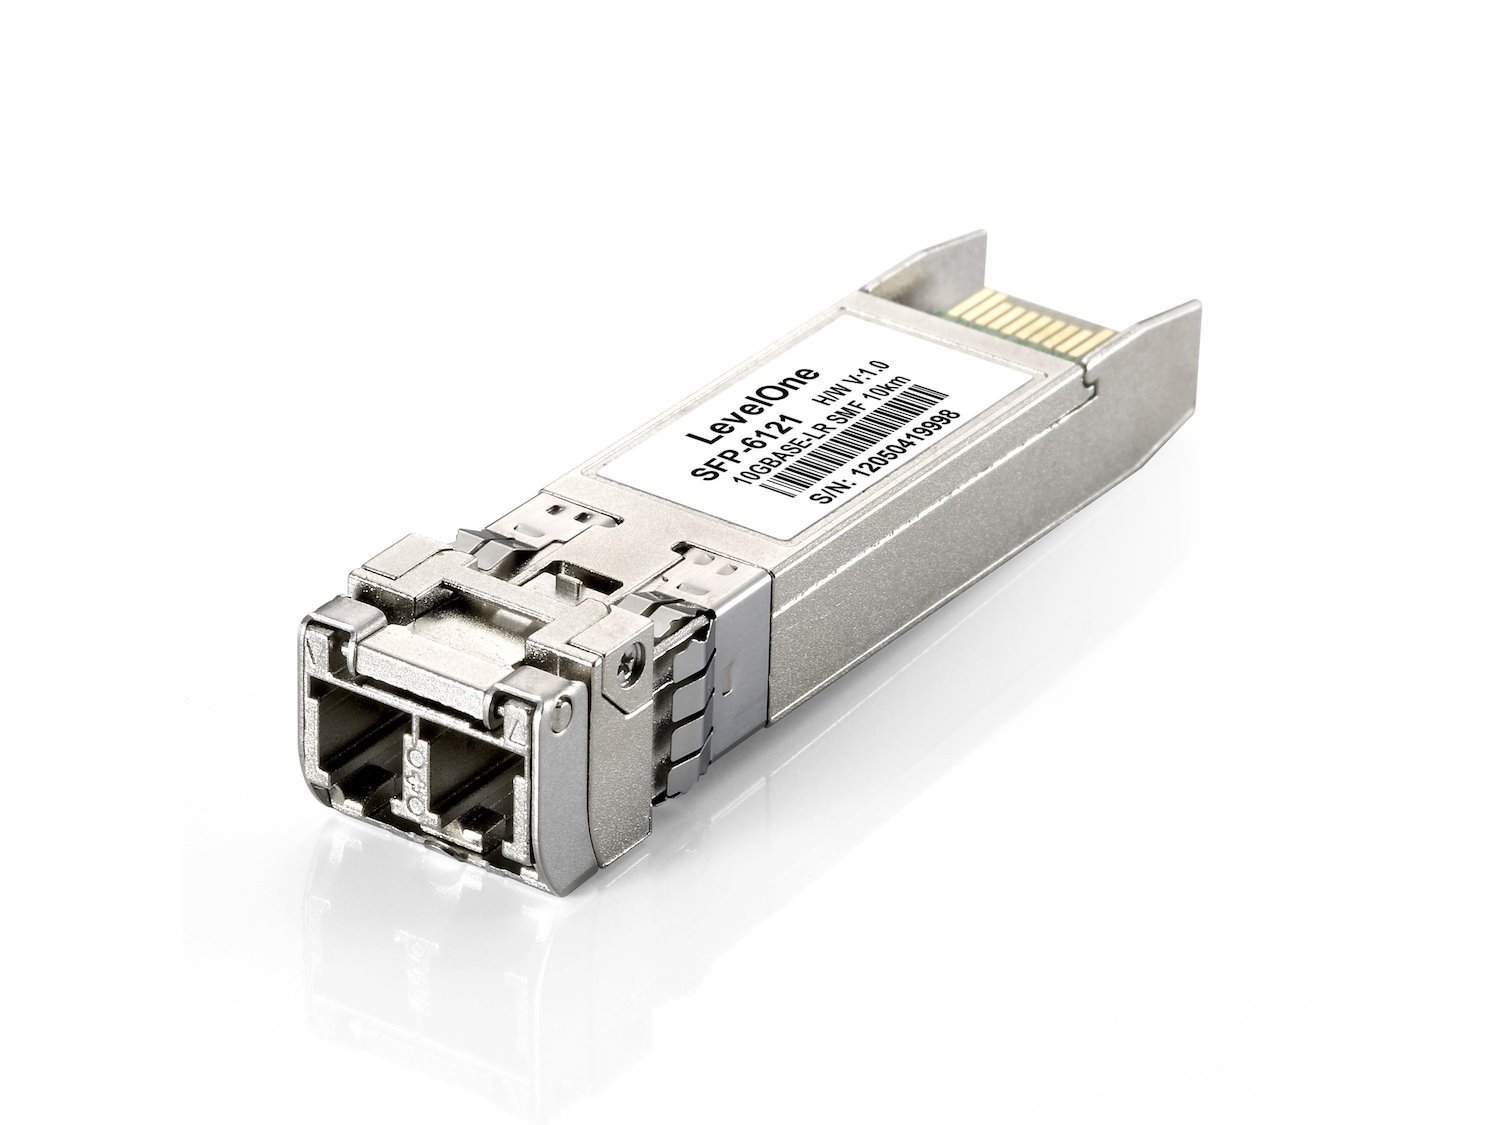 LevelOne 10Gbps Single-Mode SFP+ Transceiver 10KM 1310NM (LevelOne 10Gbps Single-Mode SFP Plus Transceiver [10KM]; High-Quality 10Gbase Short Range SFP-Plus transceiver;Comply With SFP Multi-Sourcin